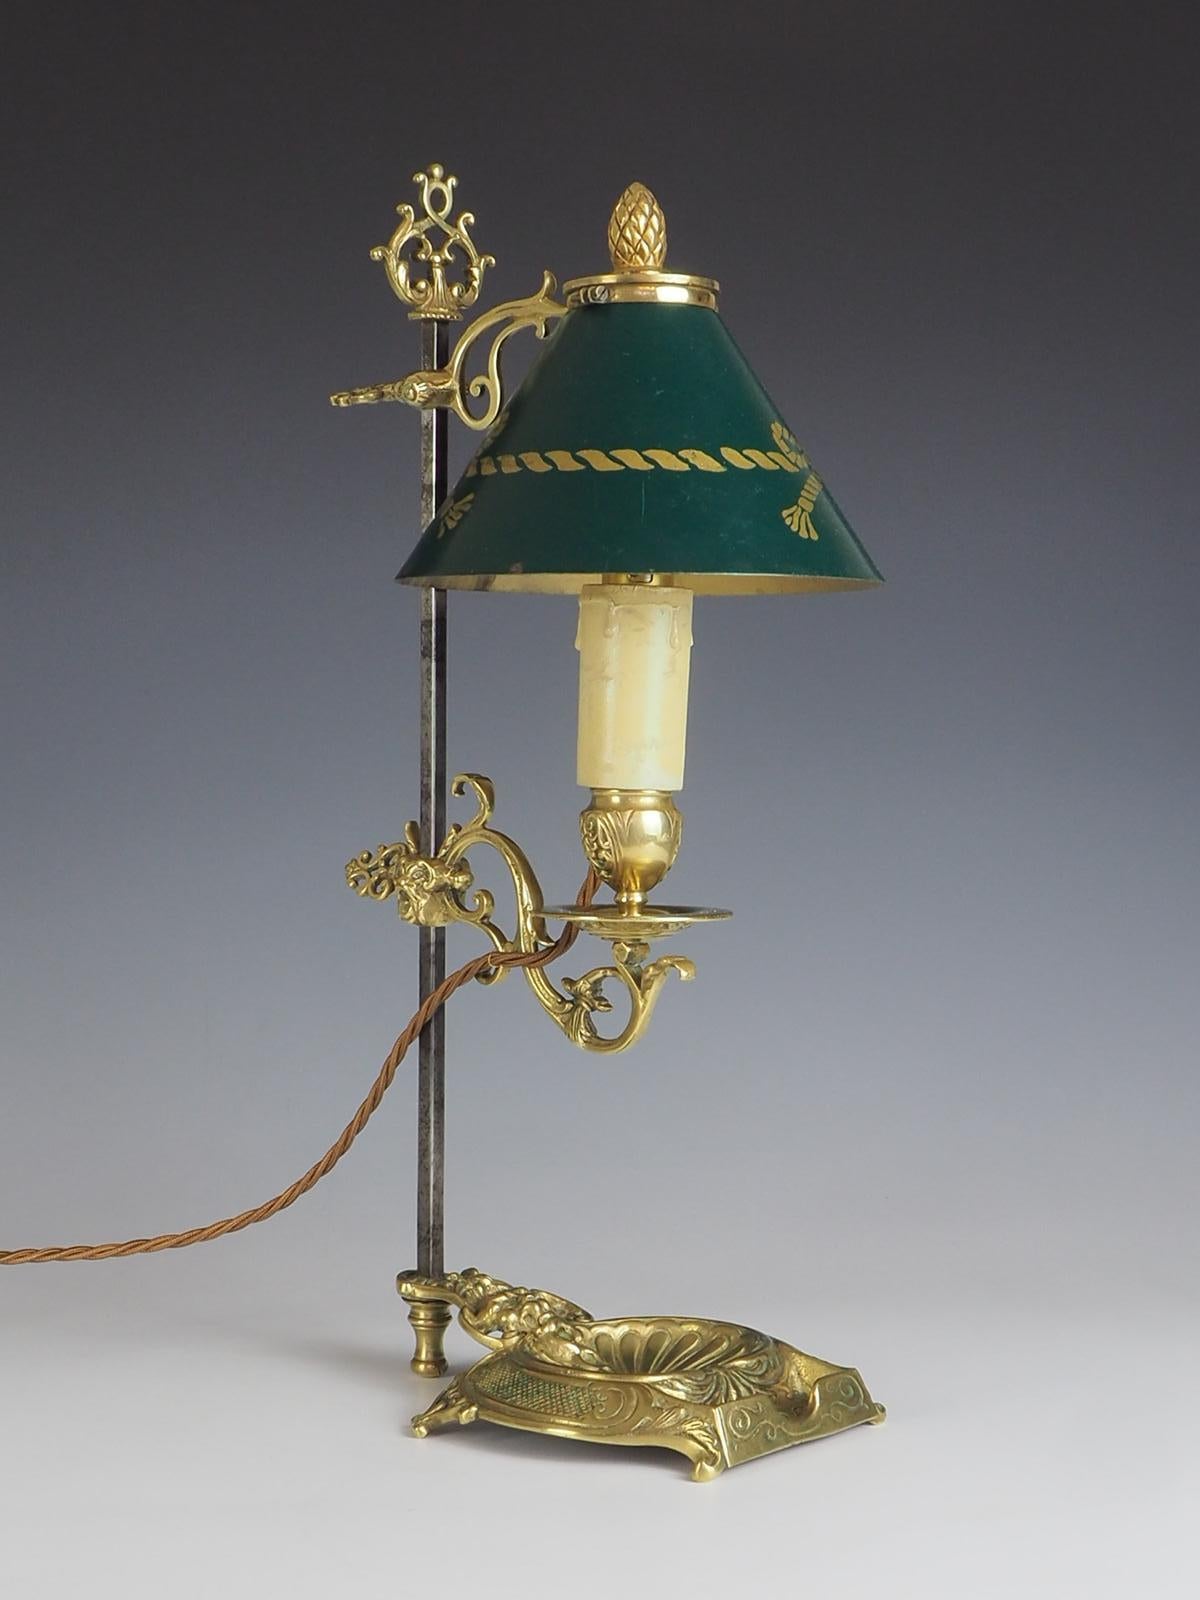 Antique French Bouilloute Candlestick Table Lamp is a stunning piece that exudes elegance and charm. Crafted from antique brass, this lamp showcases a traditional bouilloute design with a single light. The highlight of this lamp is its adjustable